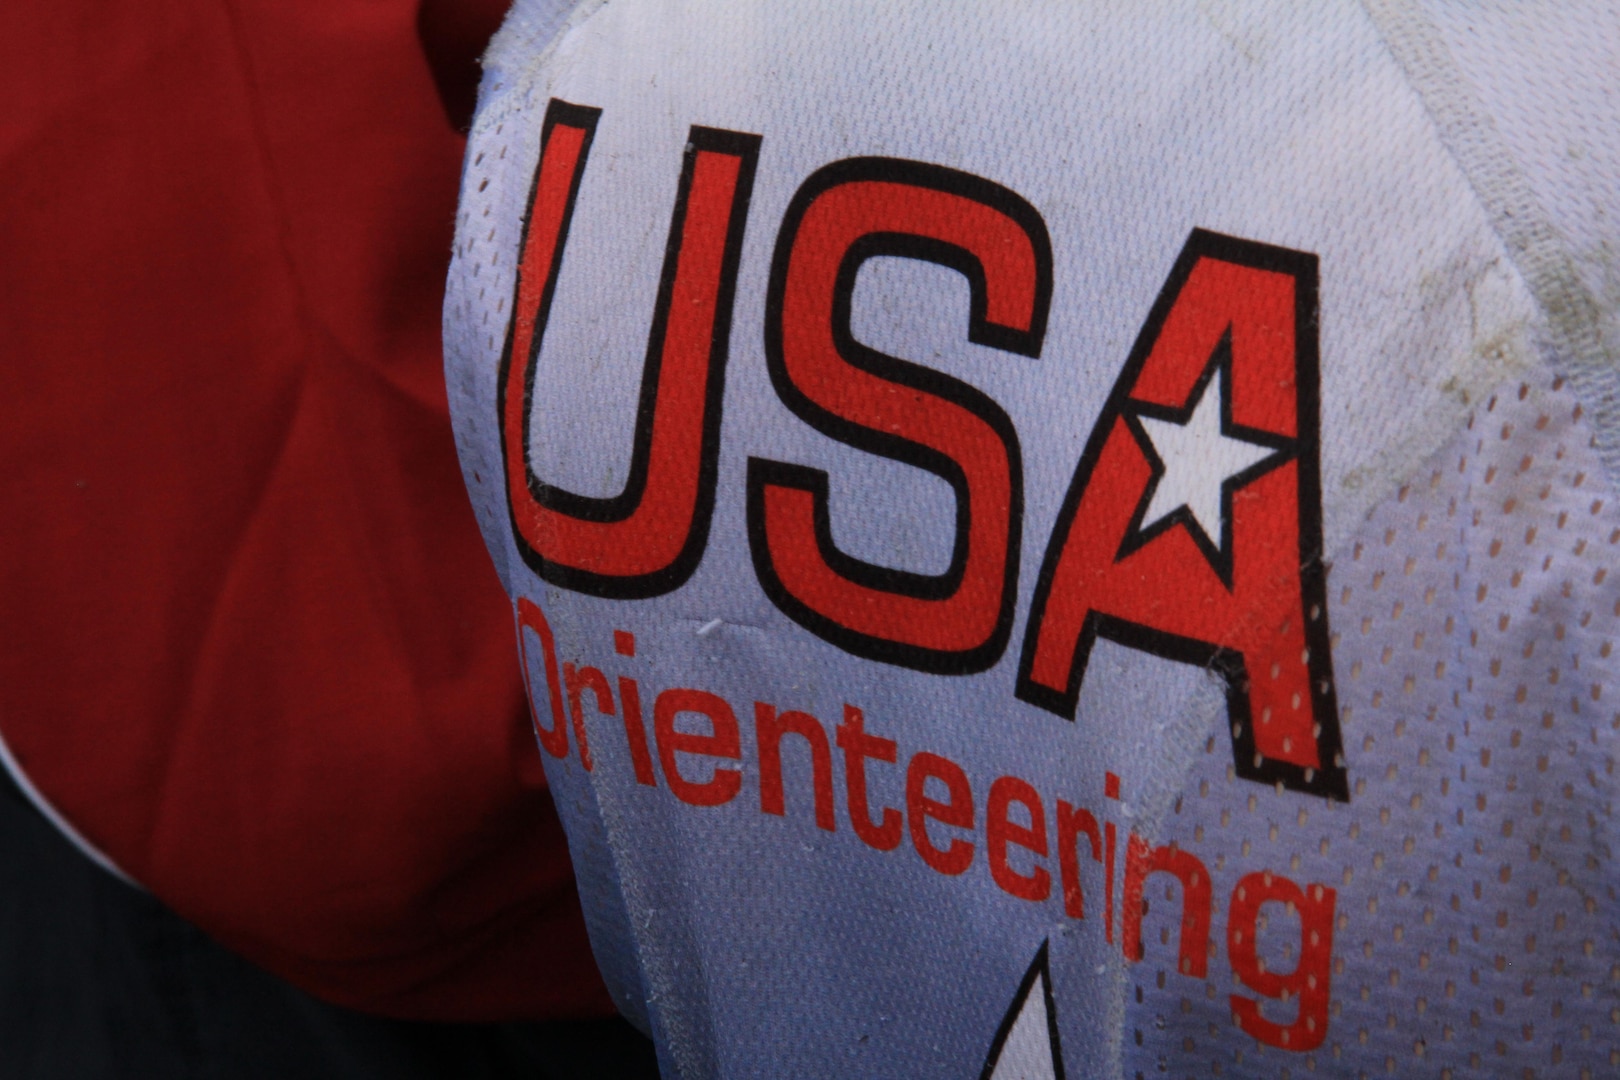 Team USA is back after a 14-year hiatus to compete at the 2013 CISM World Orienteering Military Championship hosted by the Swedish Armed Forces in Eksjo, Sweden from 26 August to 1 September.